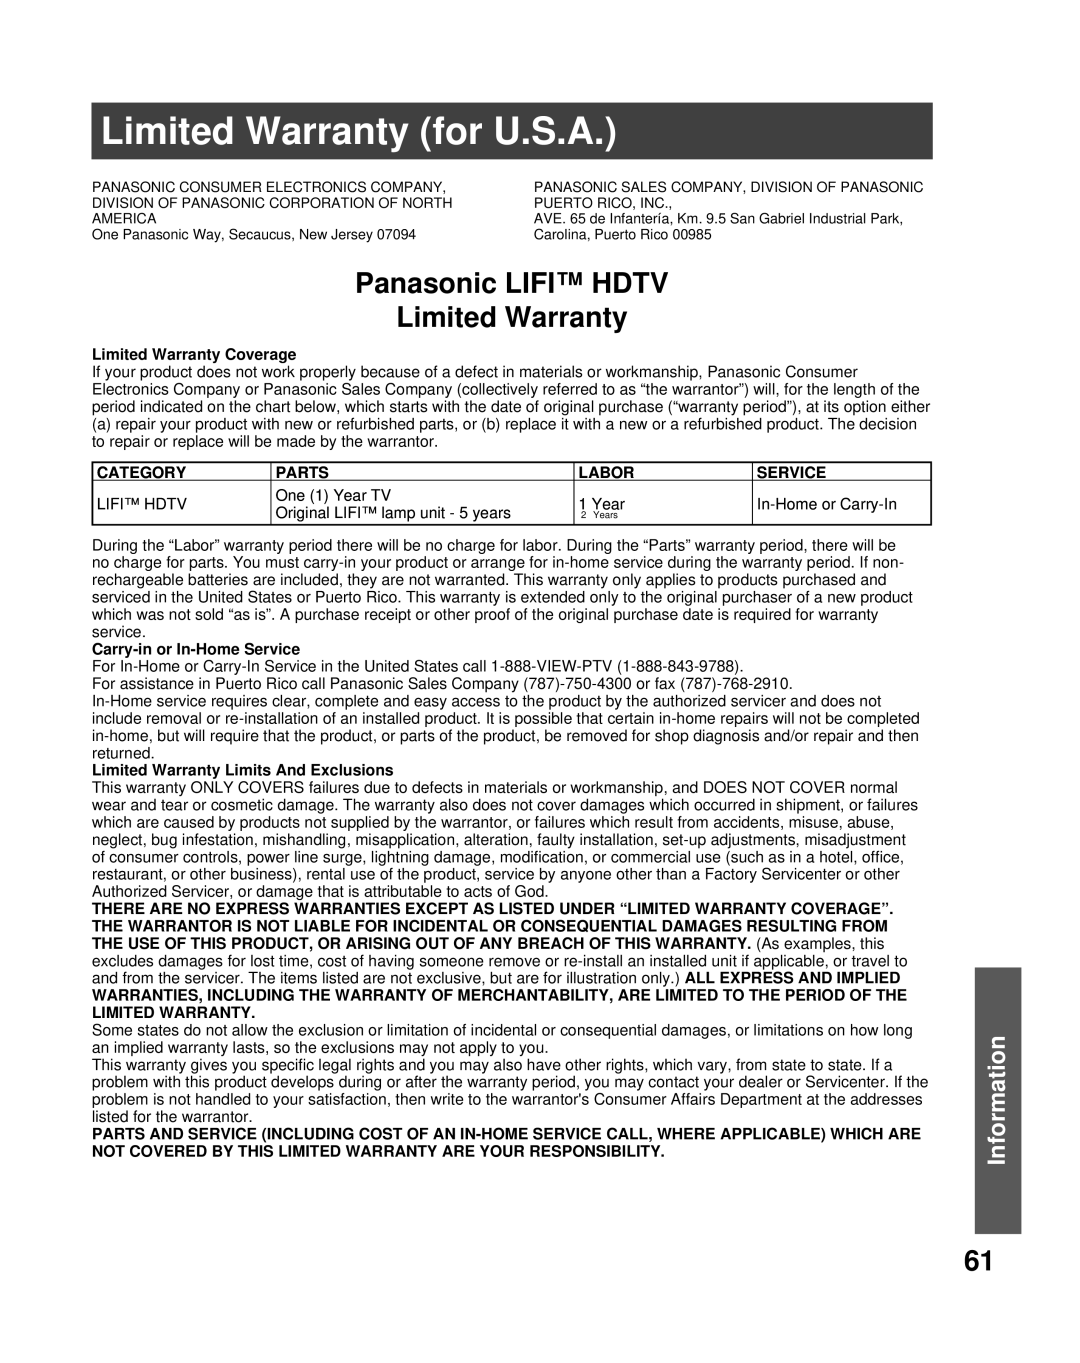 Panasonic PT-50LCX7K Limited Warranty for U.S.A, Panasonic LIFI HDTV Limited Warranty, Information, Category, Parts, Labor 